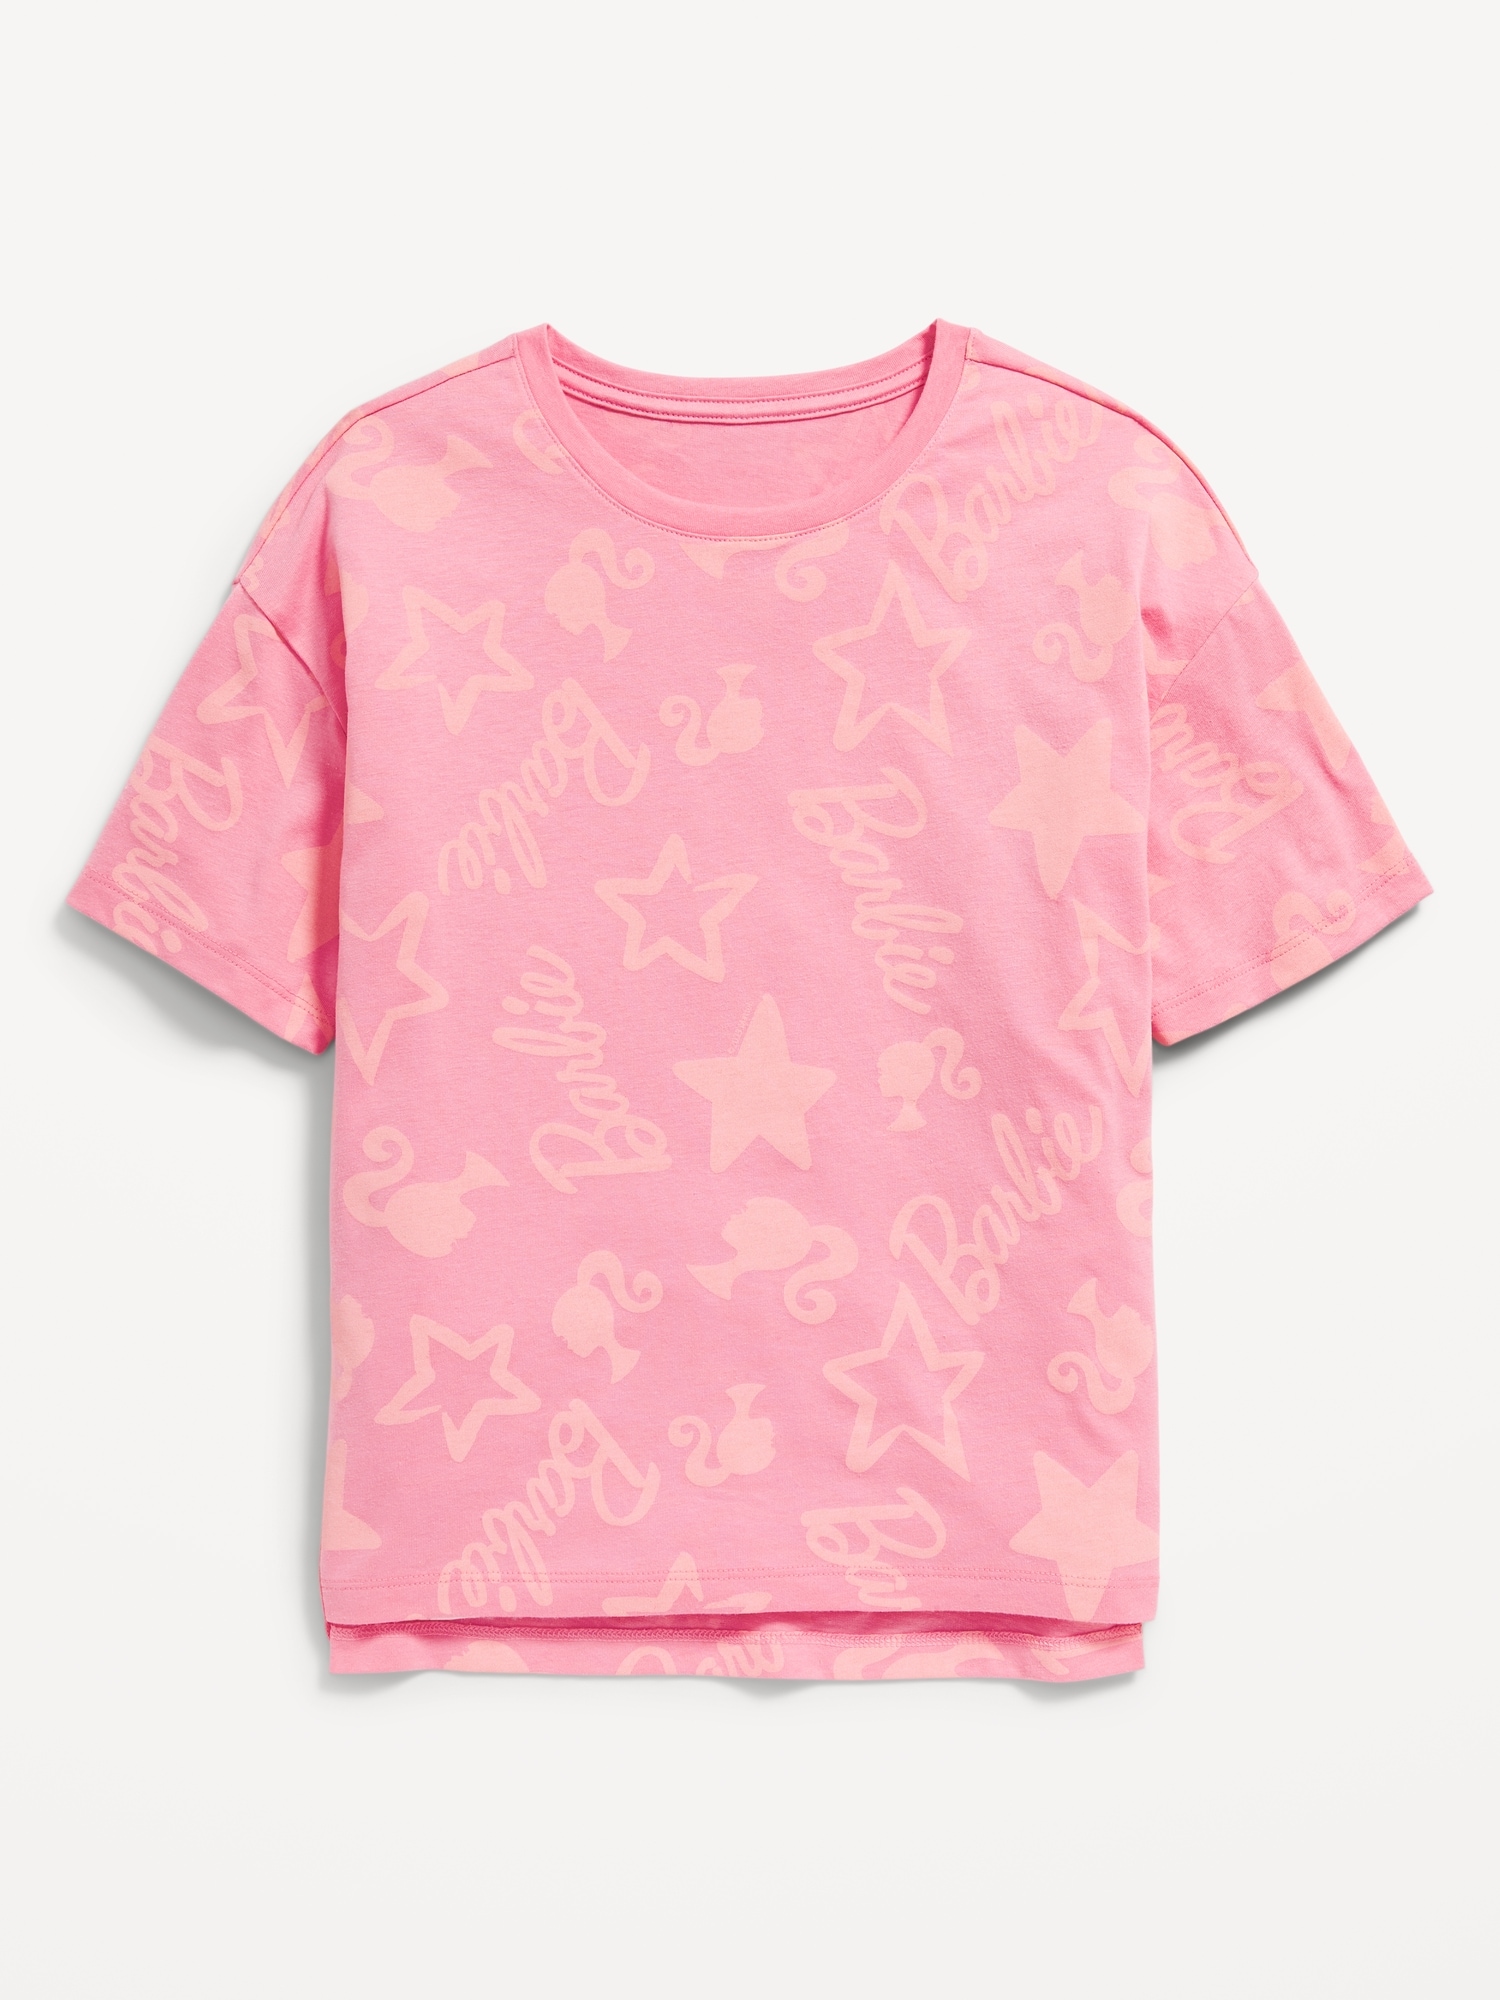 Barbie™ Graphic Tunic T-Shirt for Girls